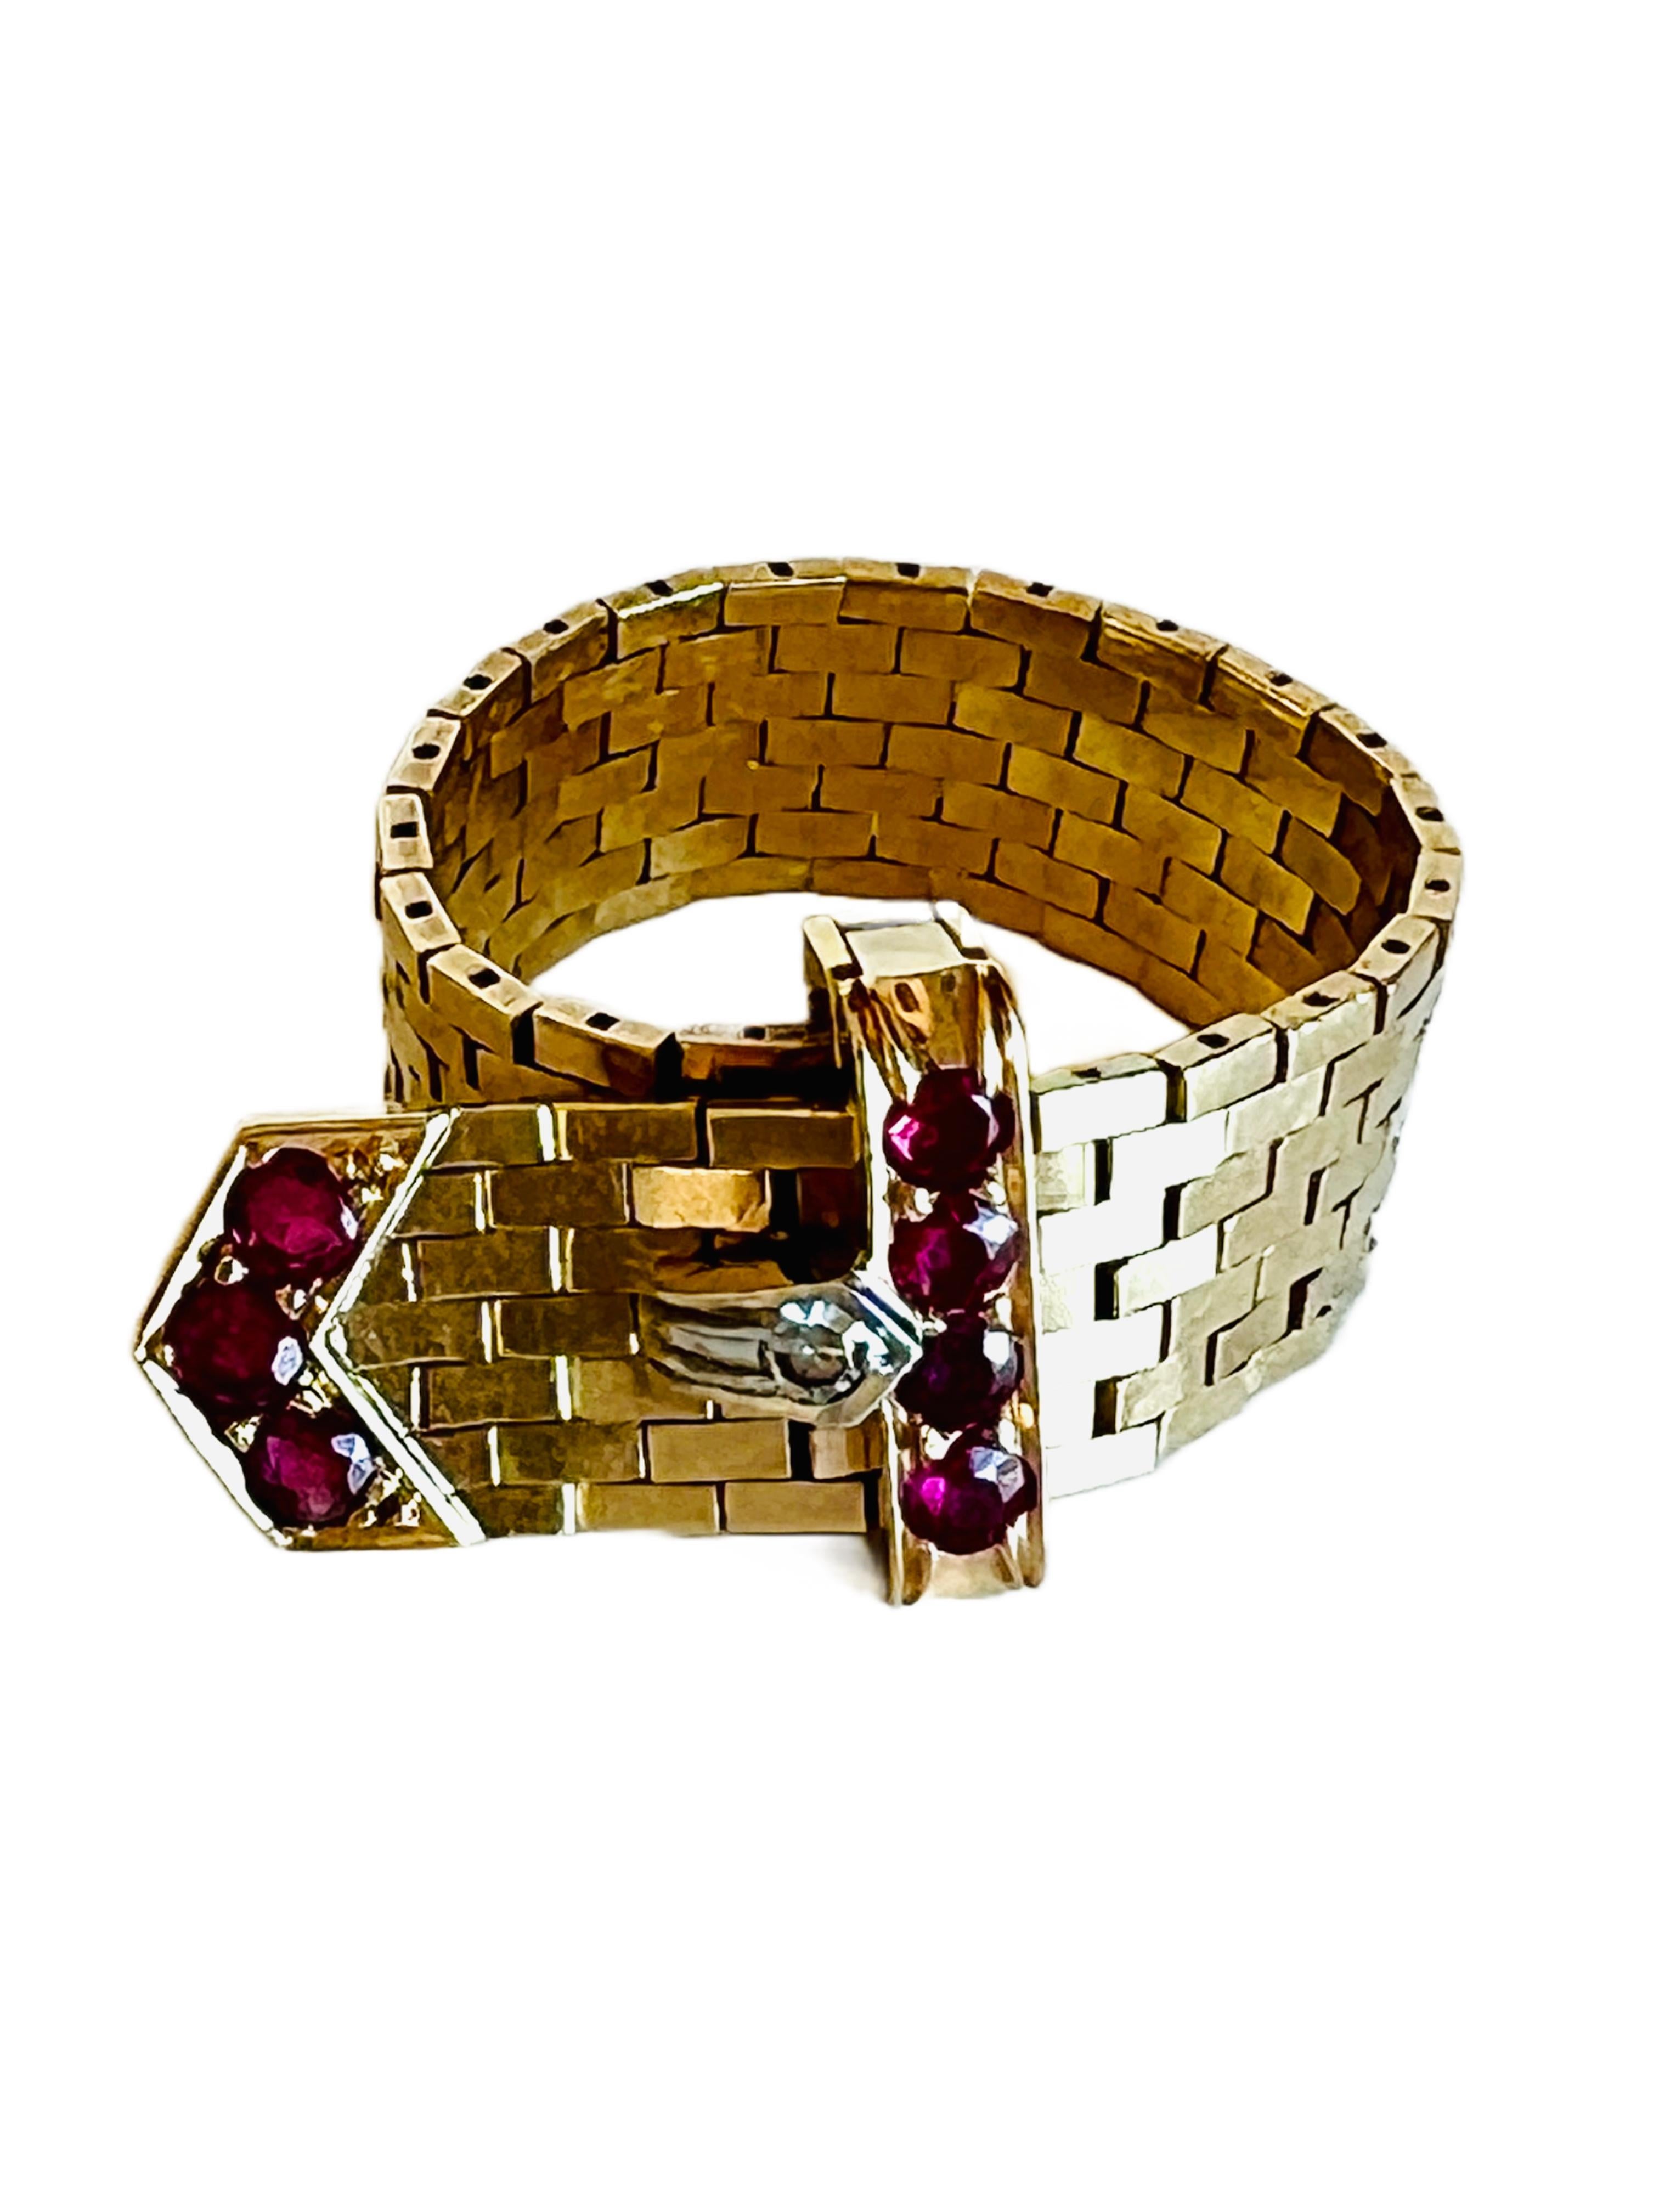 Stylish 1940's retro 14k gold, platinum, diamond and ruby mesh buckle ring attributed to Tiffany & Co or Bailey Banks & Biddle (unmarked).

The folding buckle is set with four round rubies and a small diamond in platinum. The tip of the ring is set